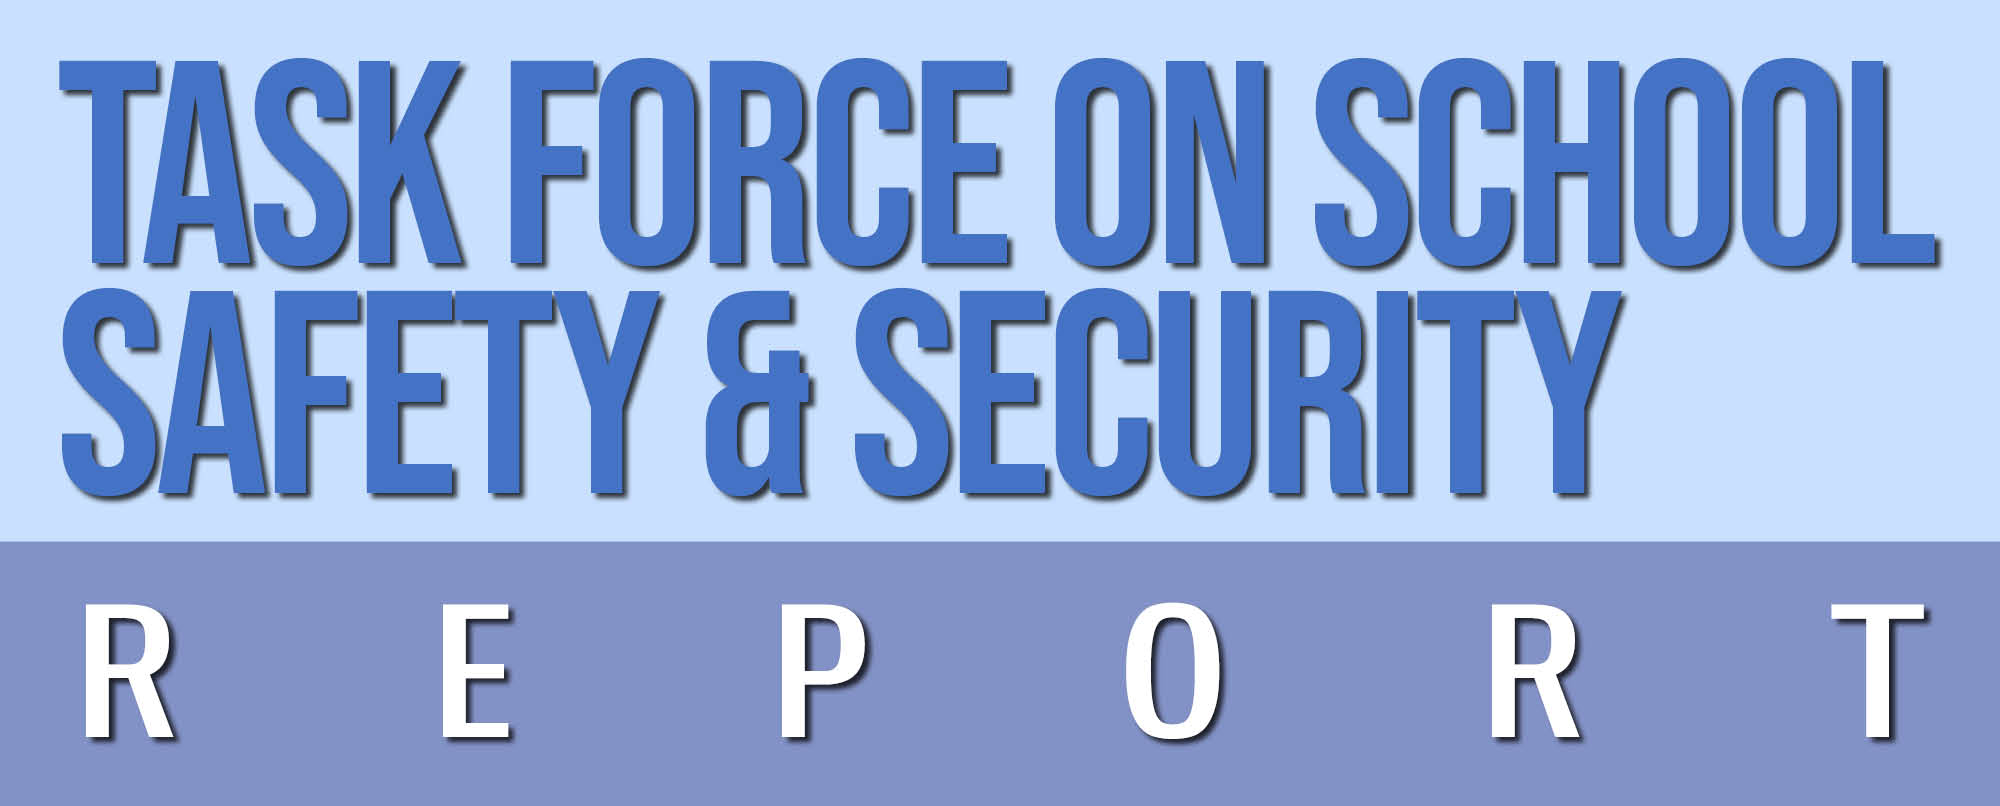 Task Force on School Safety & Security Report